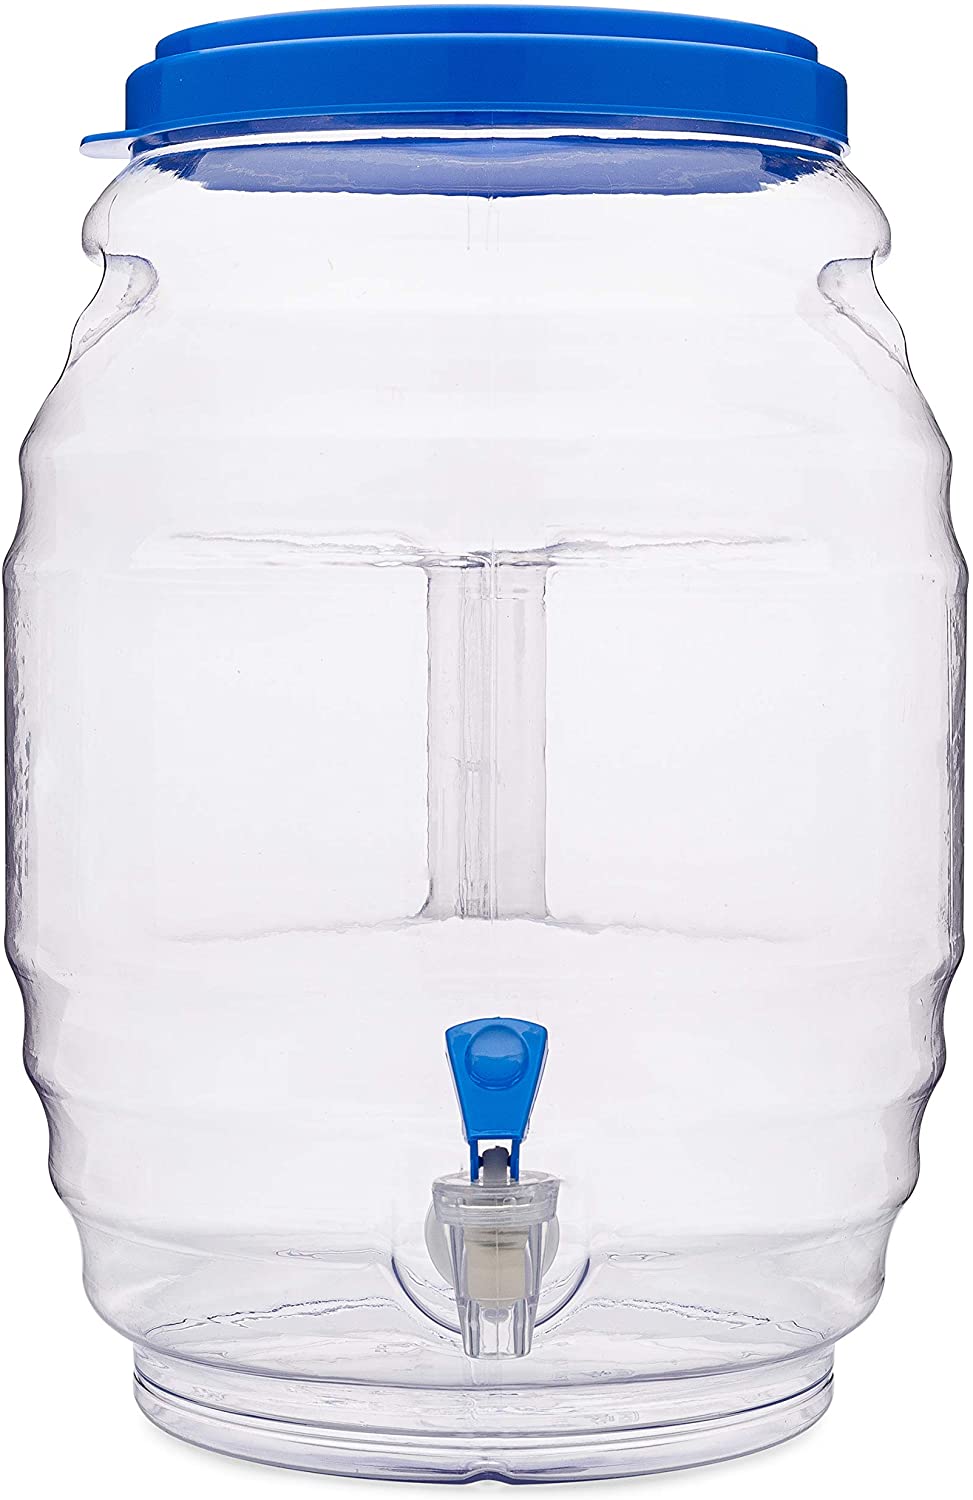 3 GAL Blue Jug Water Container With Lid & Spout